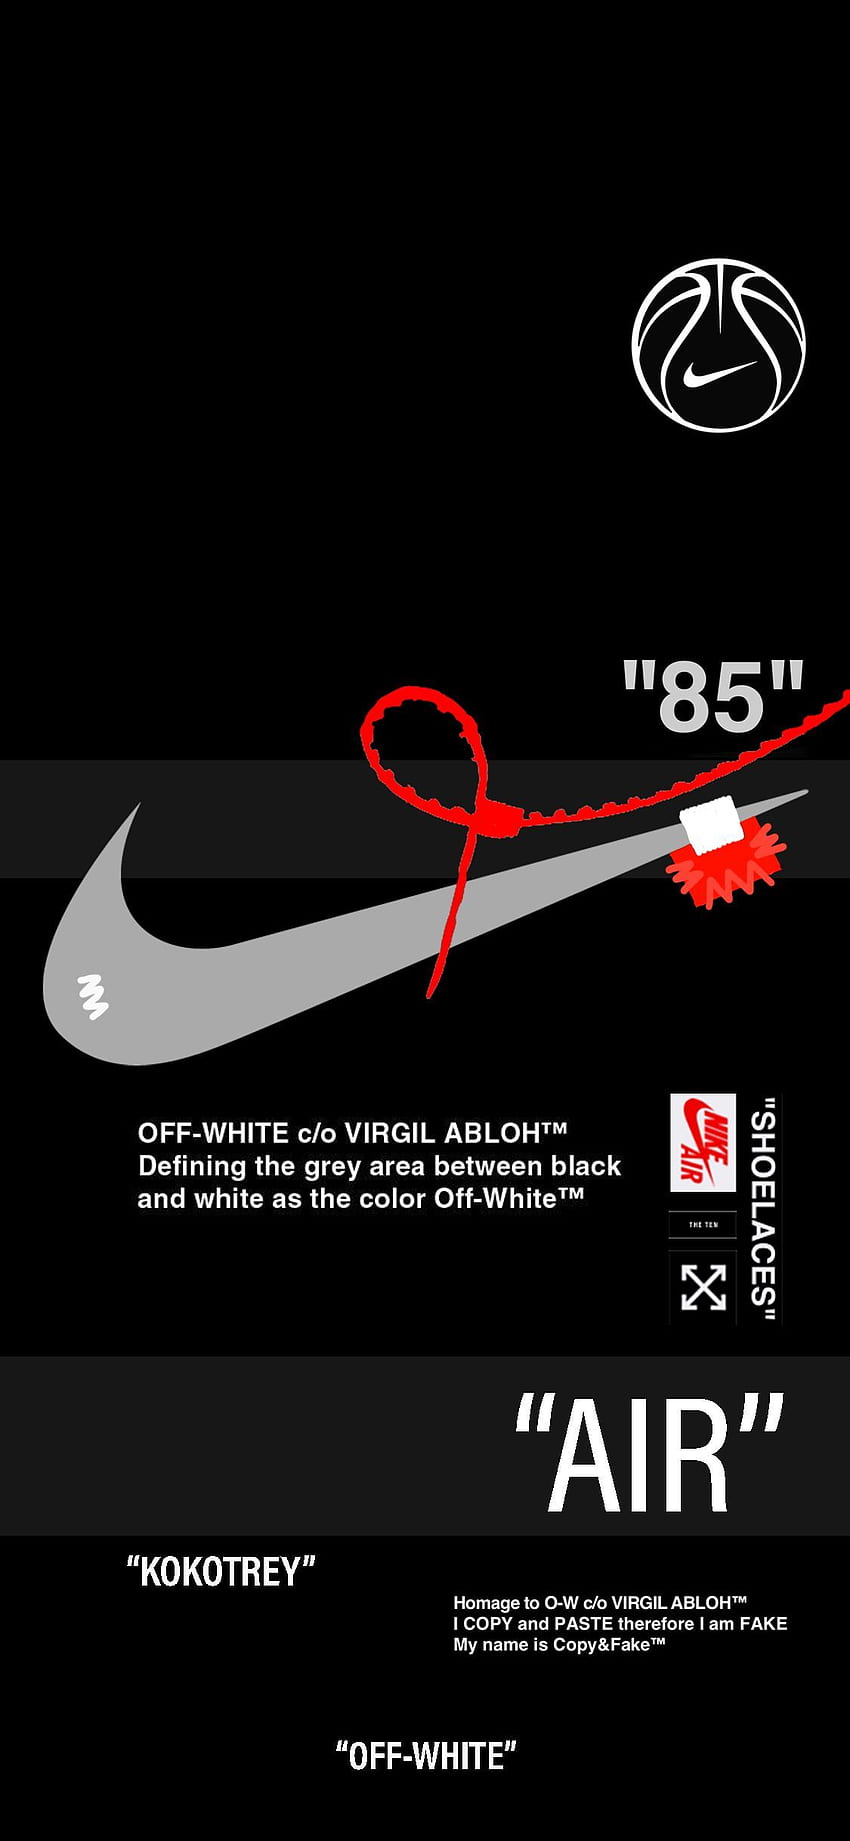 A poster for the nike air 85 - Off-White, Nike